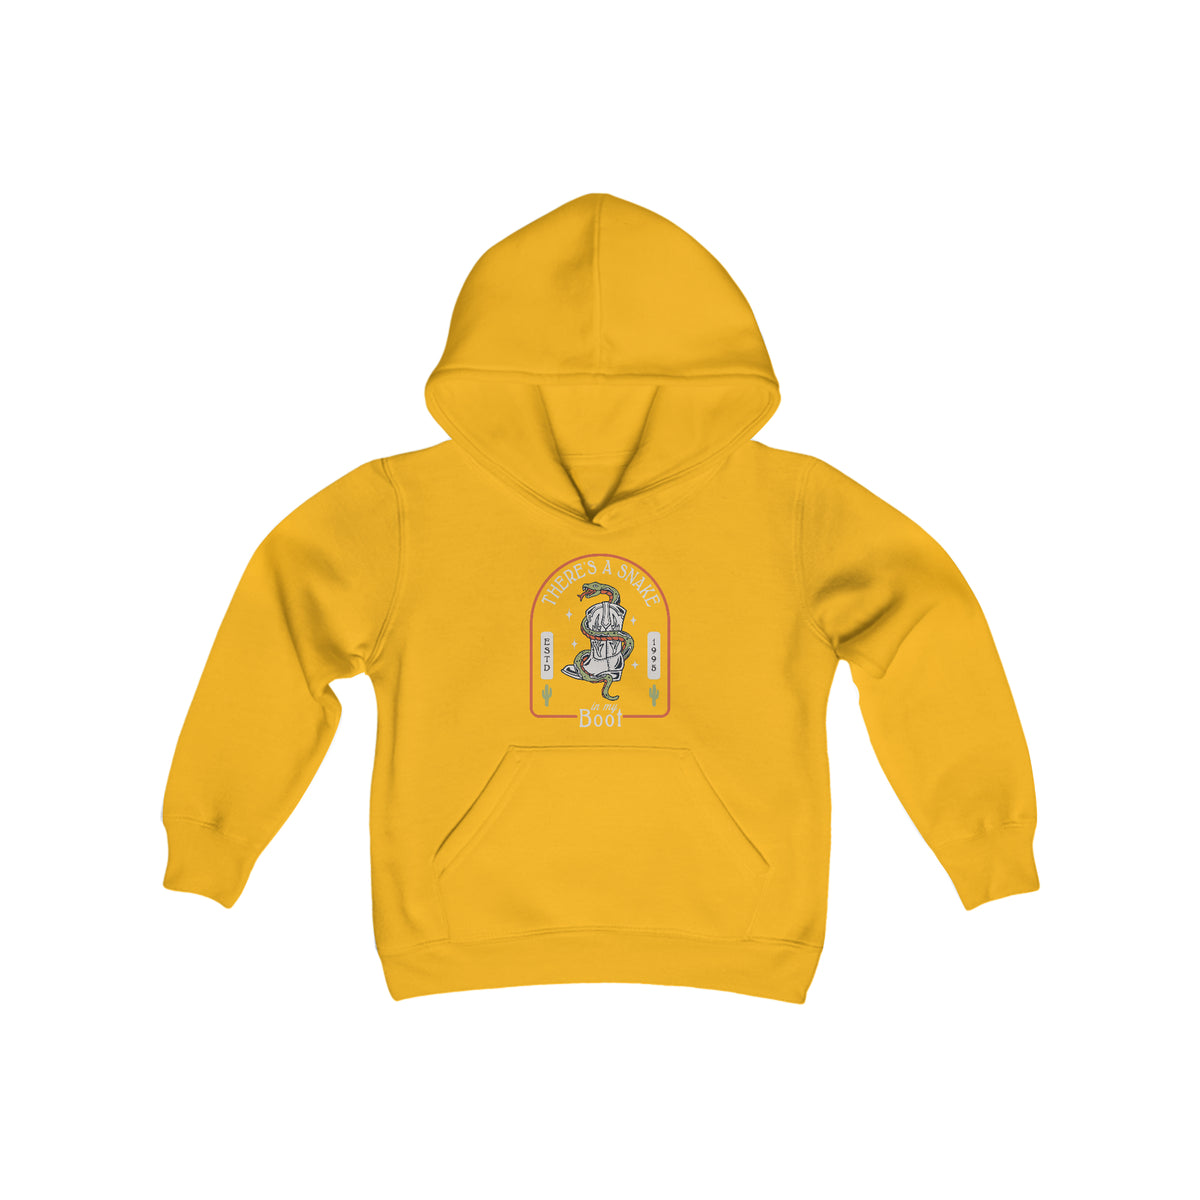 There's A Snake In My Boot Gildan Youth Heavy Blend Hooded Sweatshirt